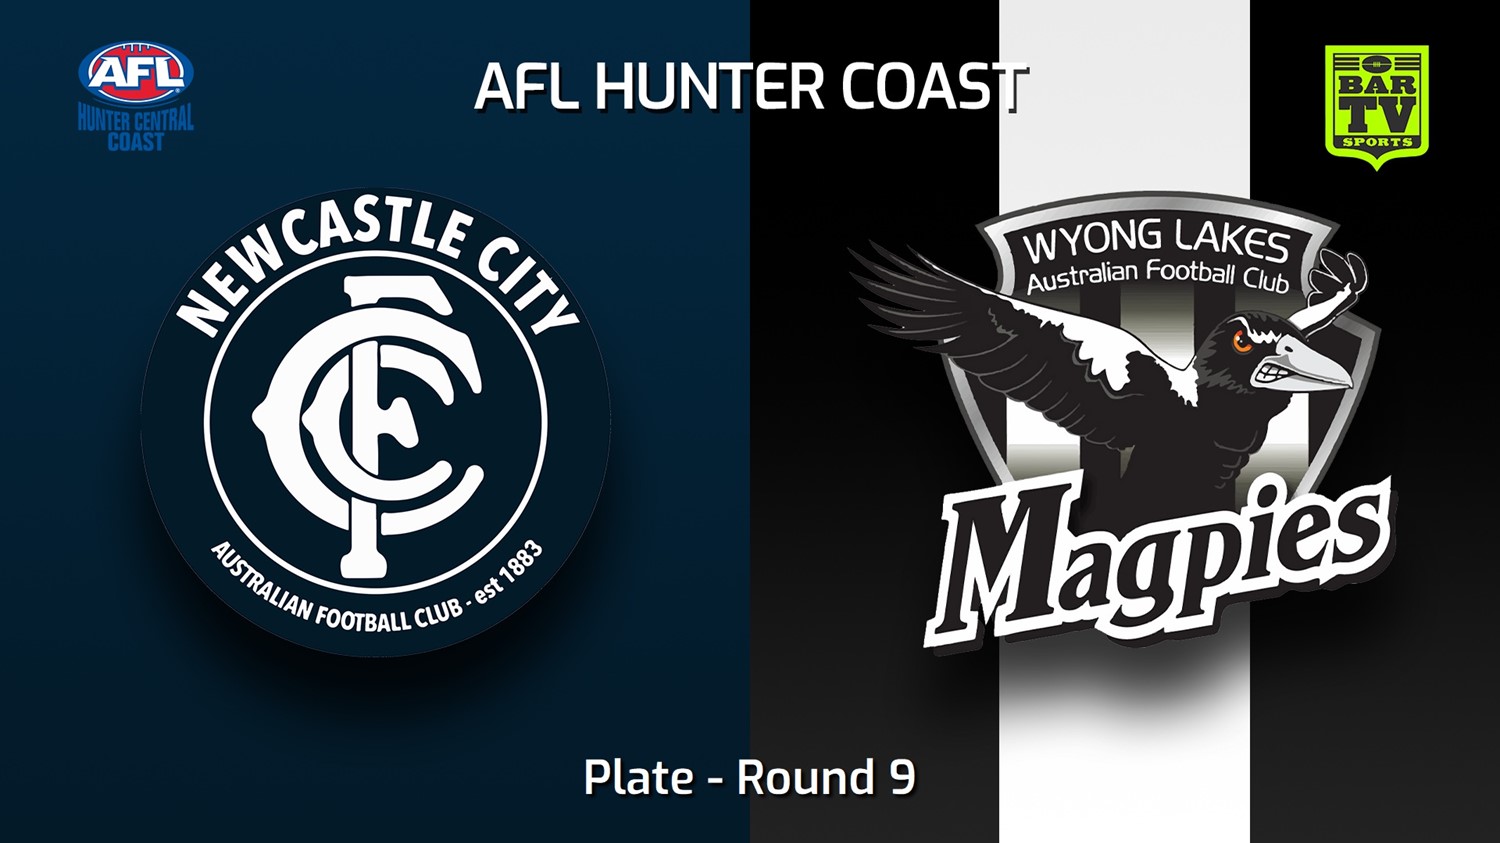 230603-AFL Hunter Central Coast Round 9 - Plate - Newcastle City  v Wyong Lakes Magpies Minigame Slate Image